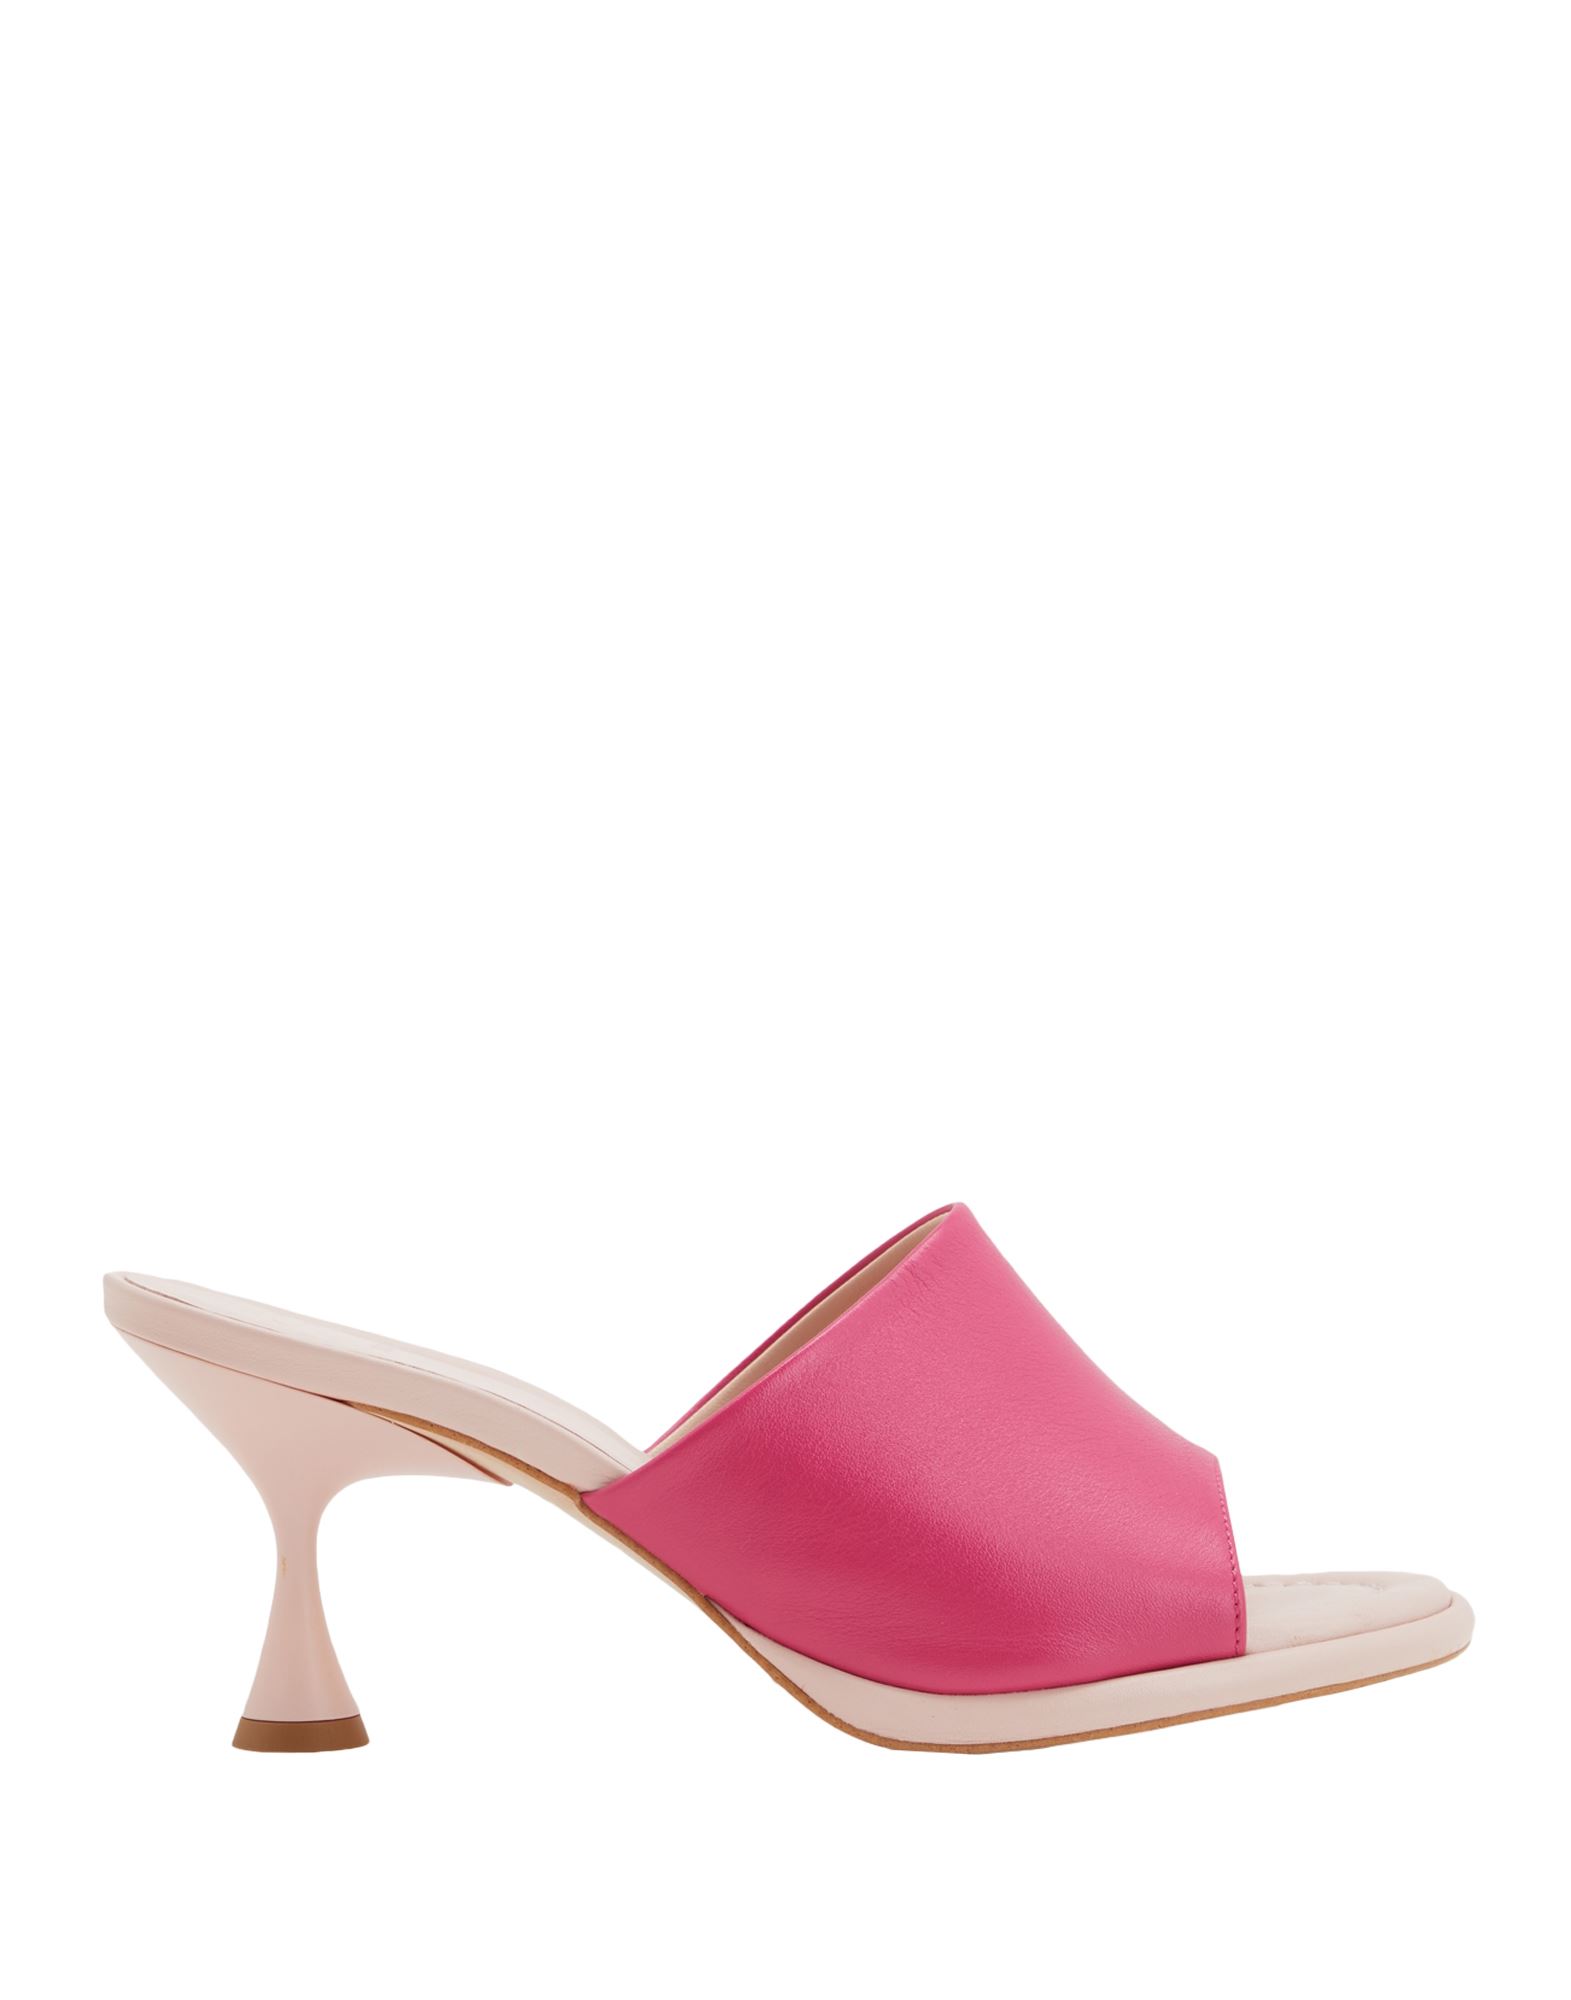 8 By Yoox Sandals In Pink